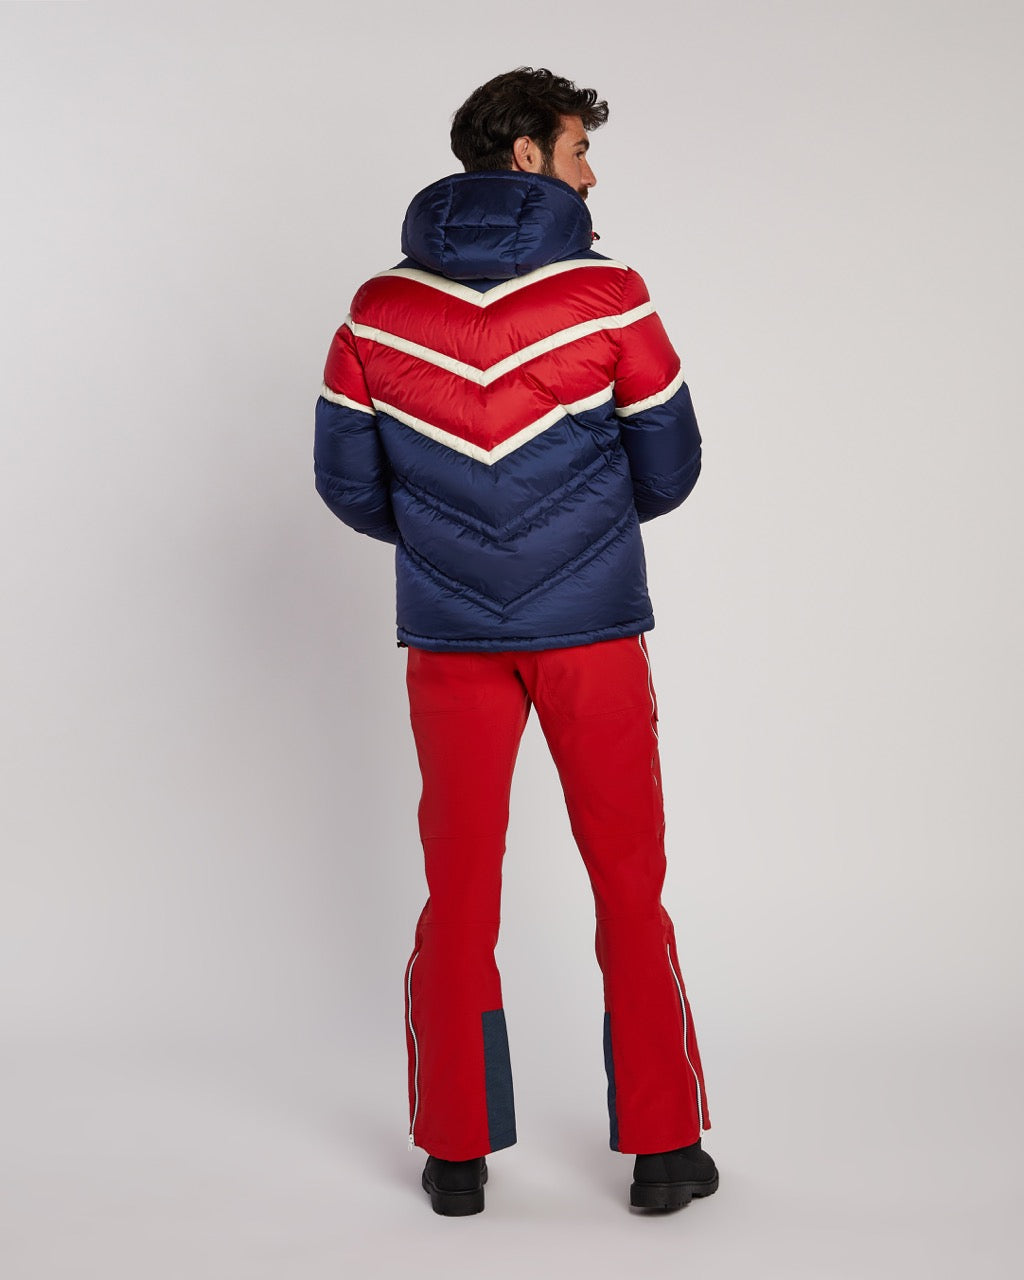 Perfect Moment Men's Chevron Super Day Jacket in Navy